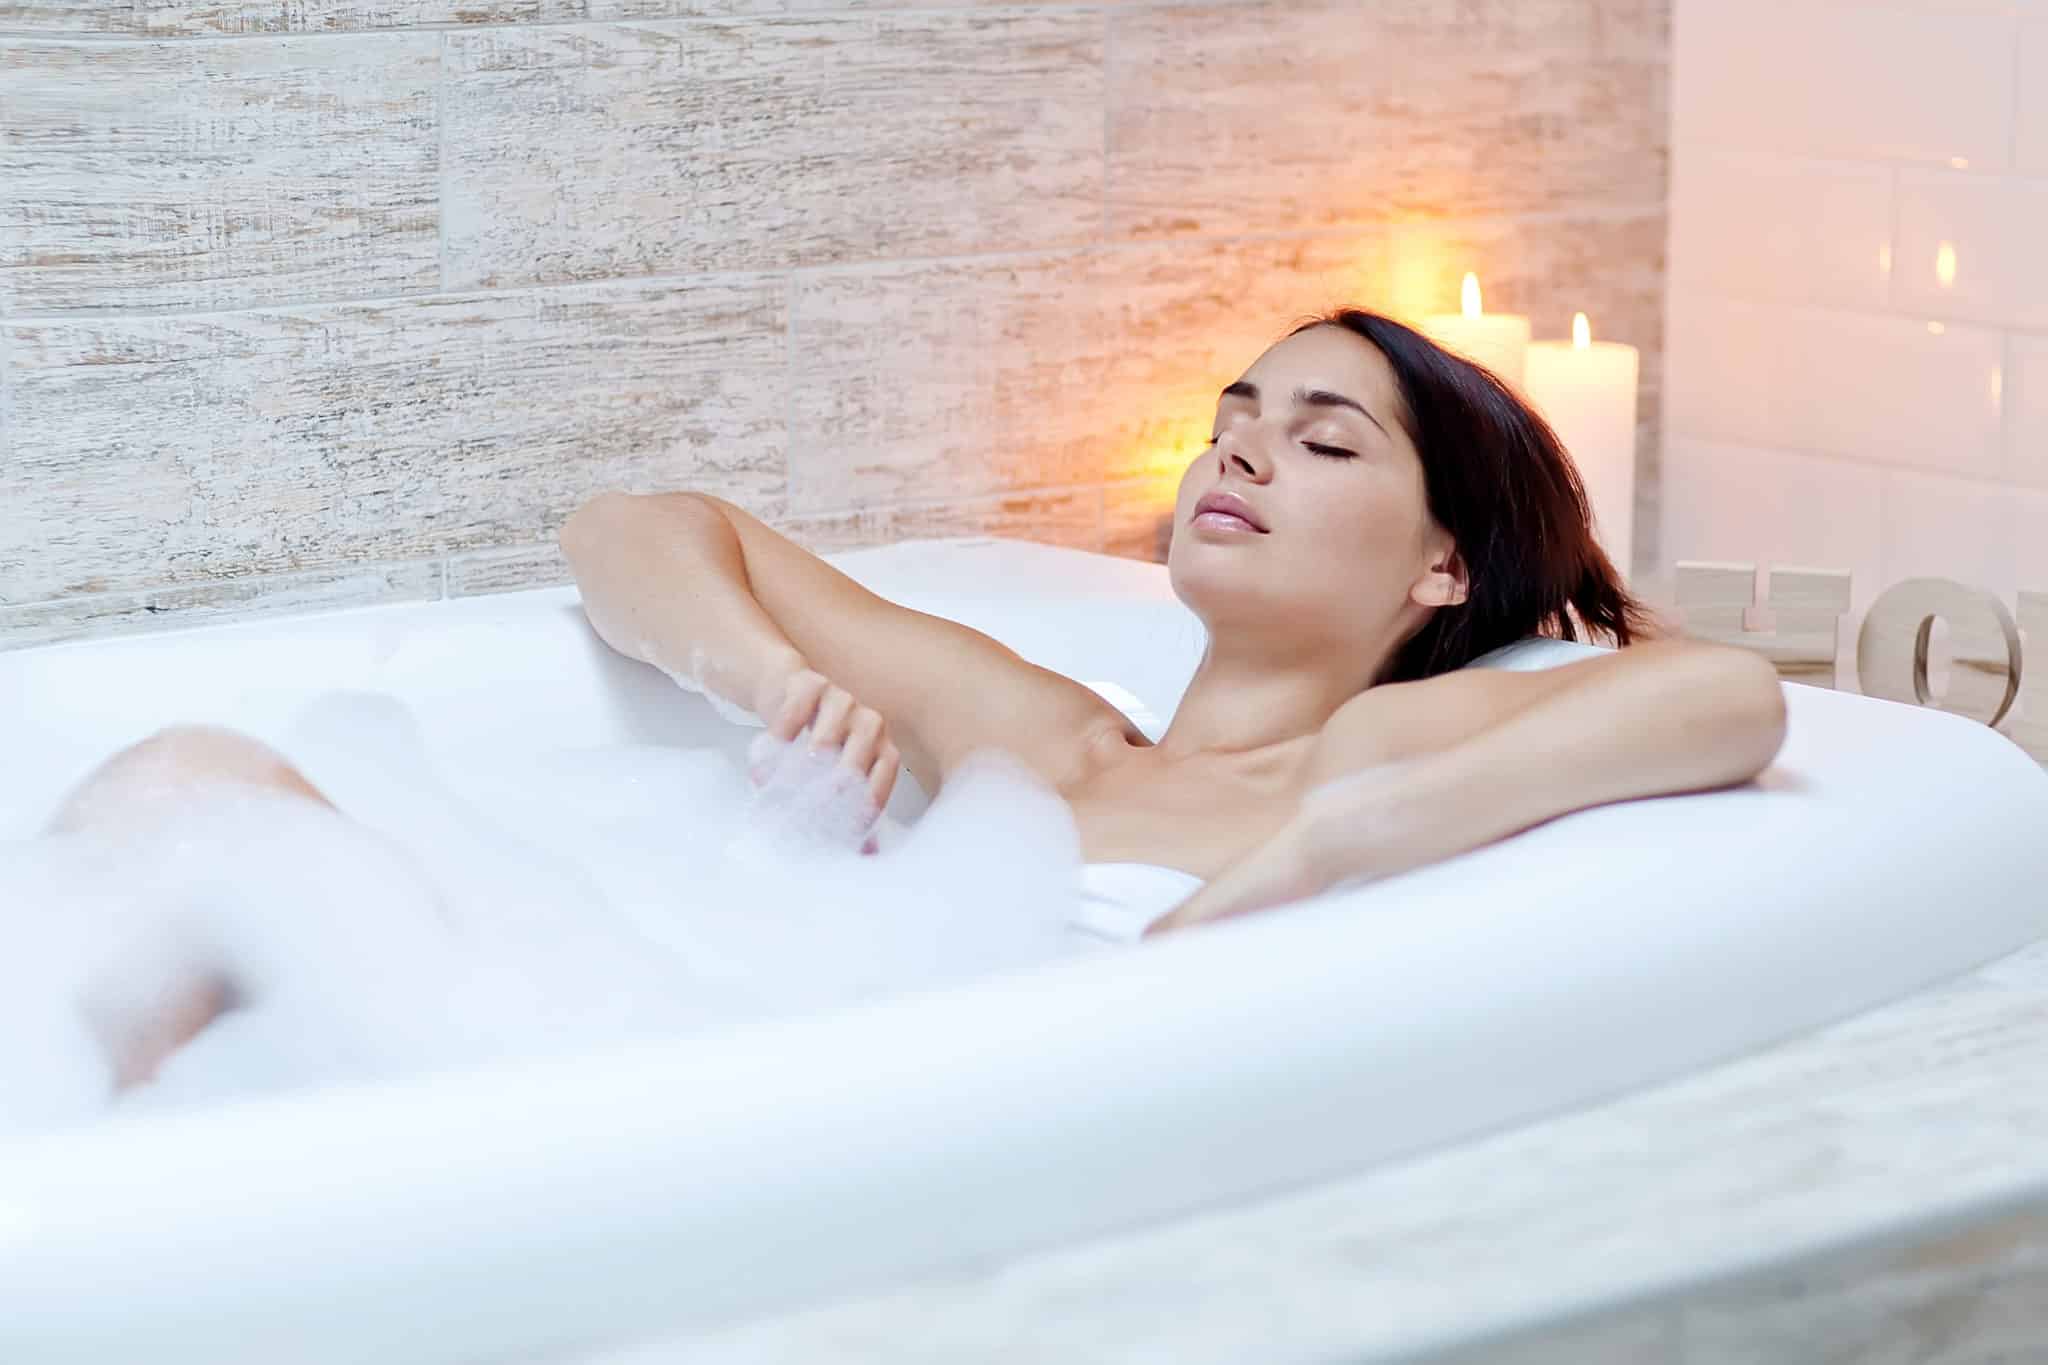 Woman lying in bubble bath with candles behind her